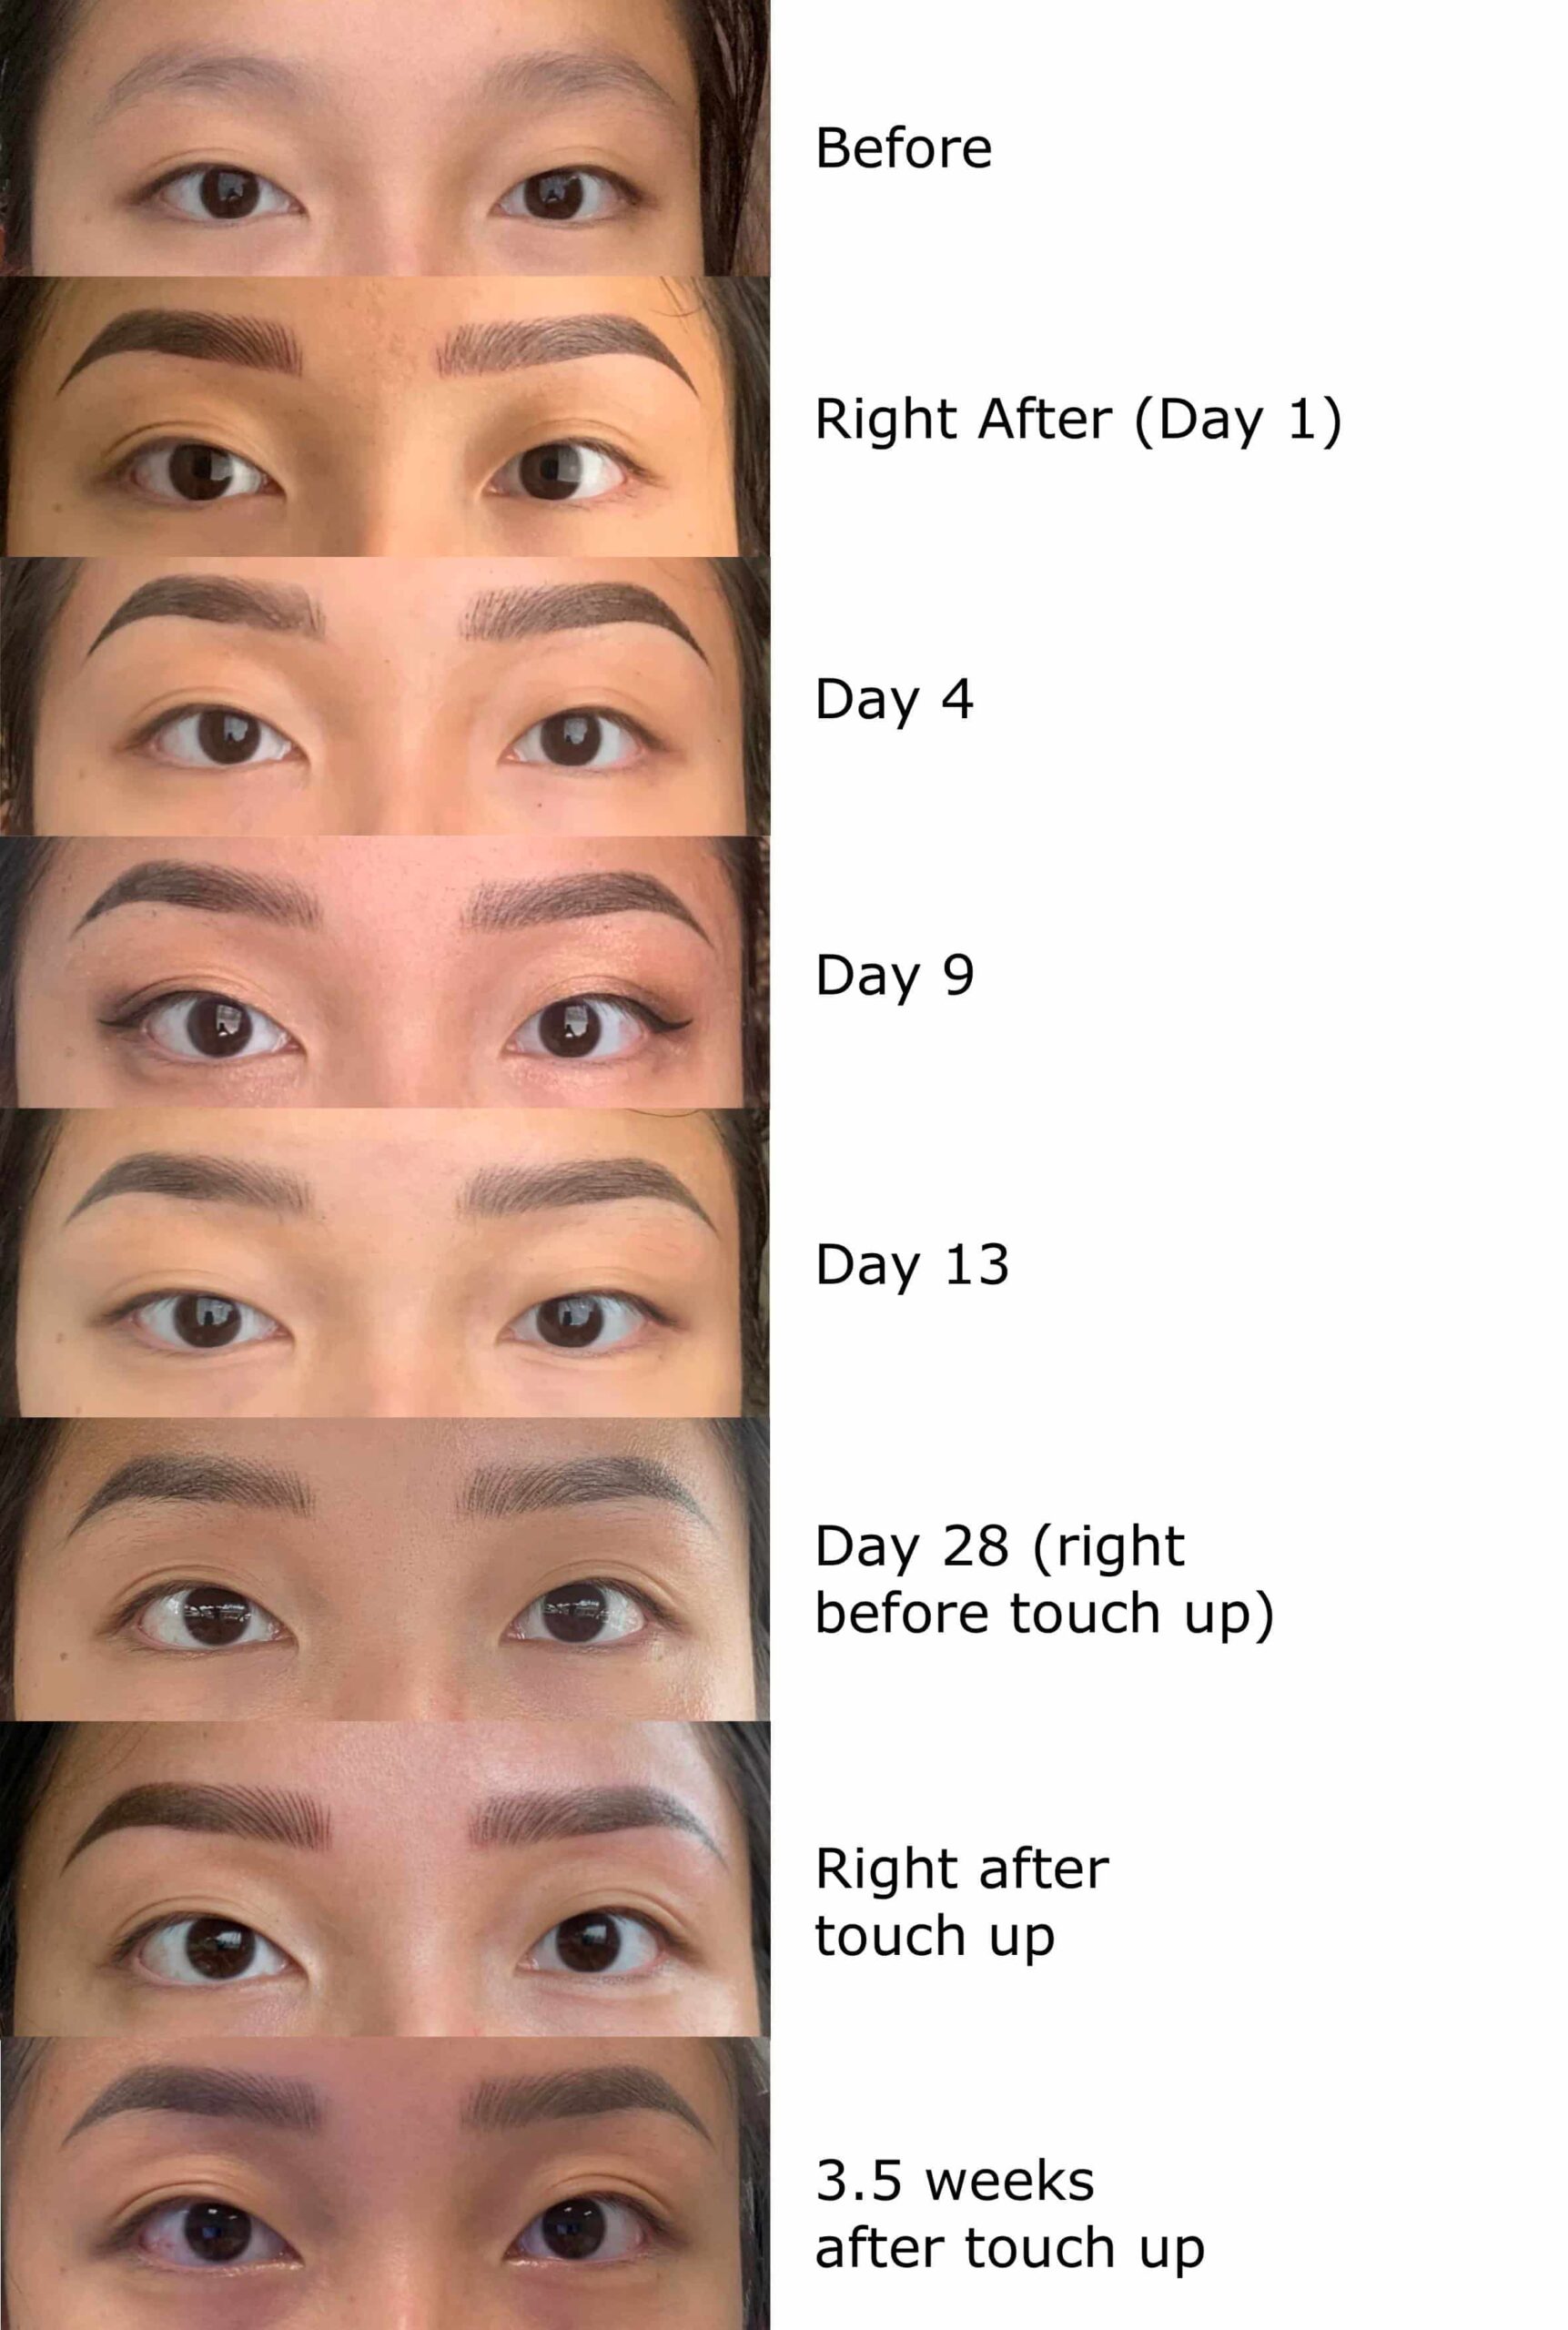 day by day healing process of microblading